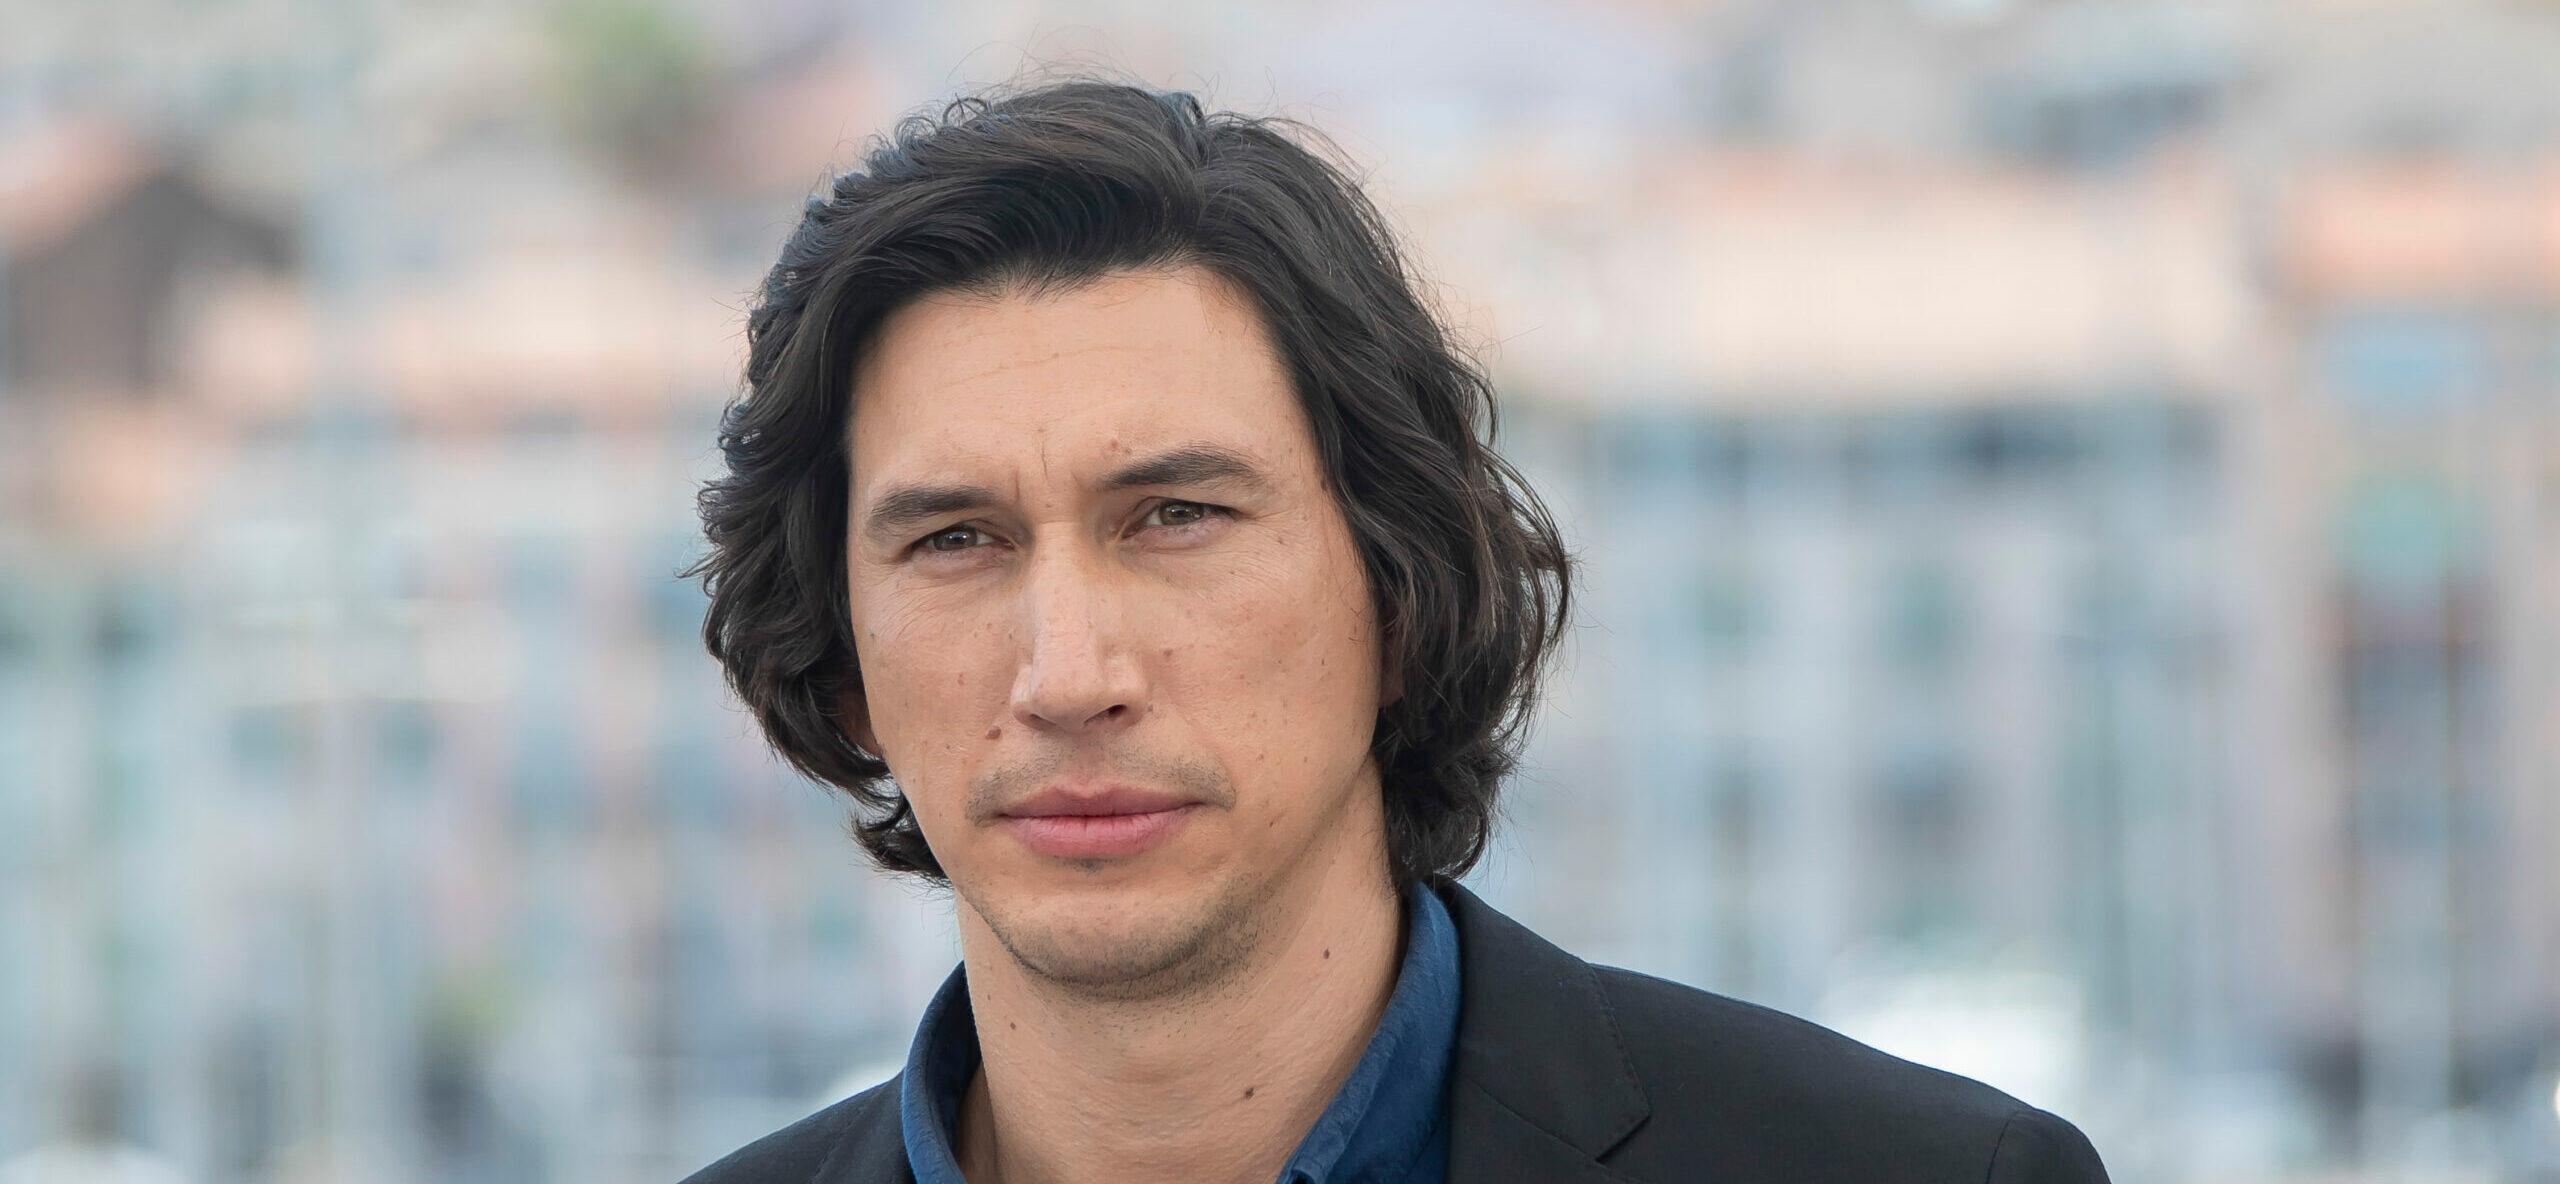 Adam Driver at the 